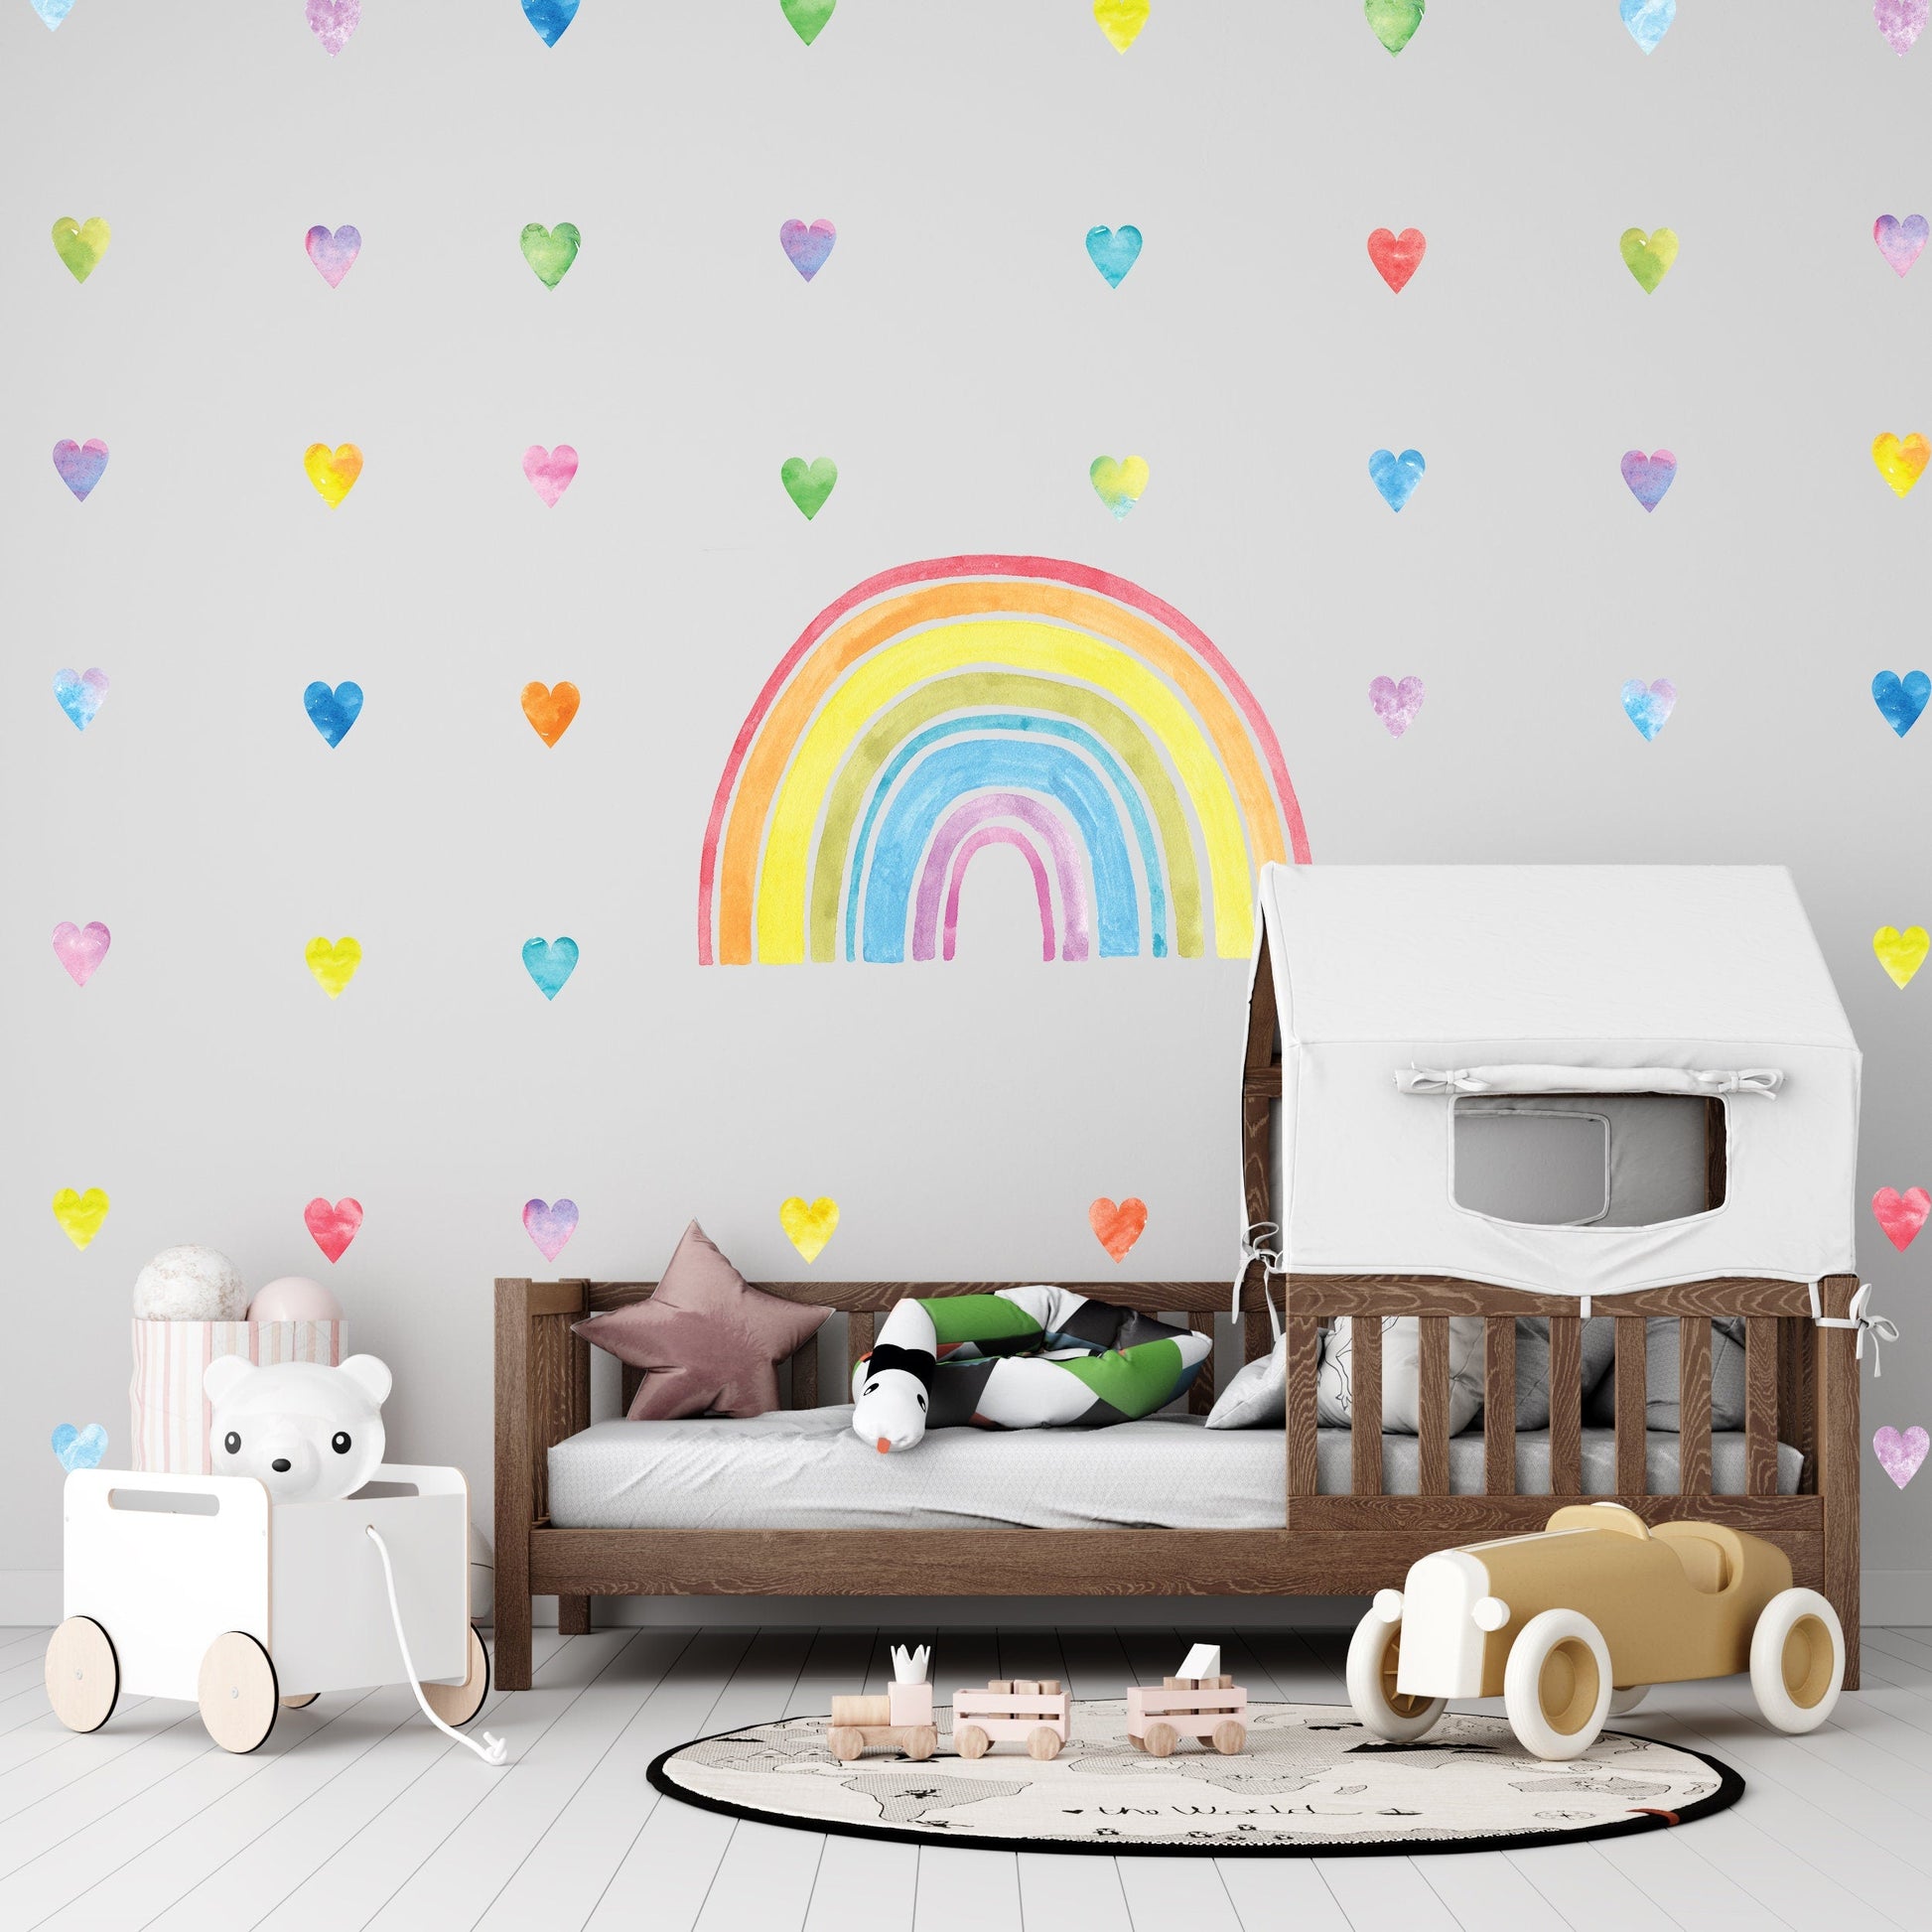 Colorful Rainbow Wall Decal Hearts Stickers, LF162